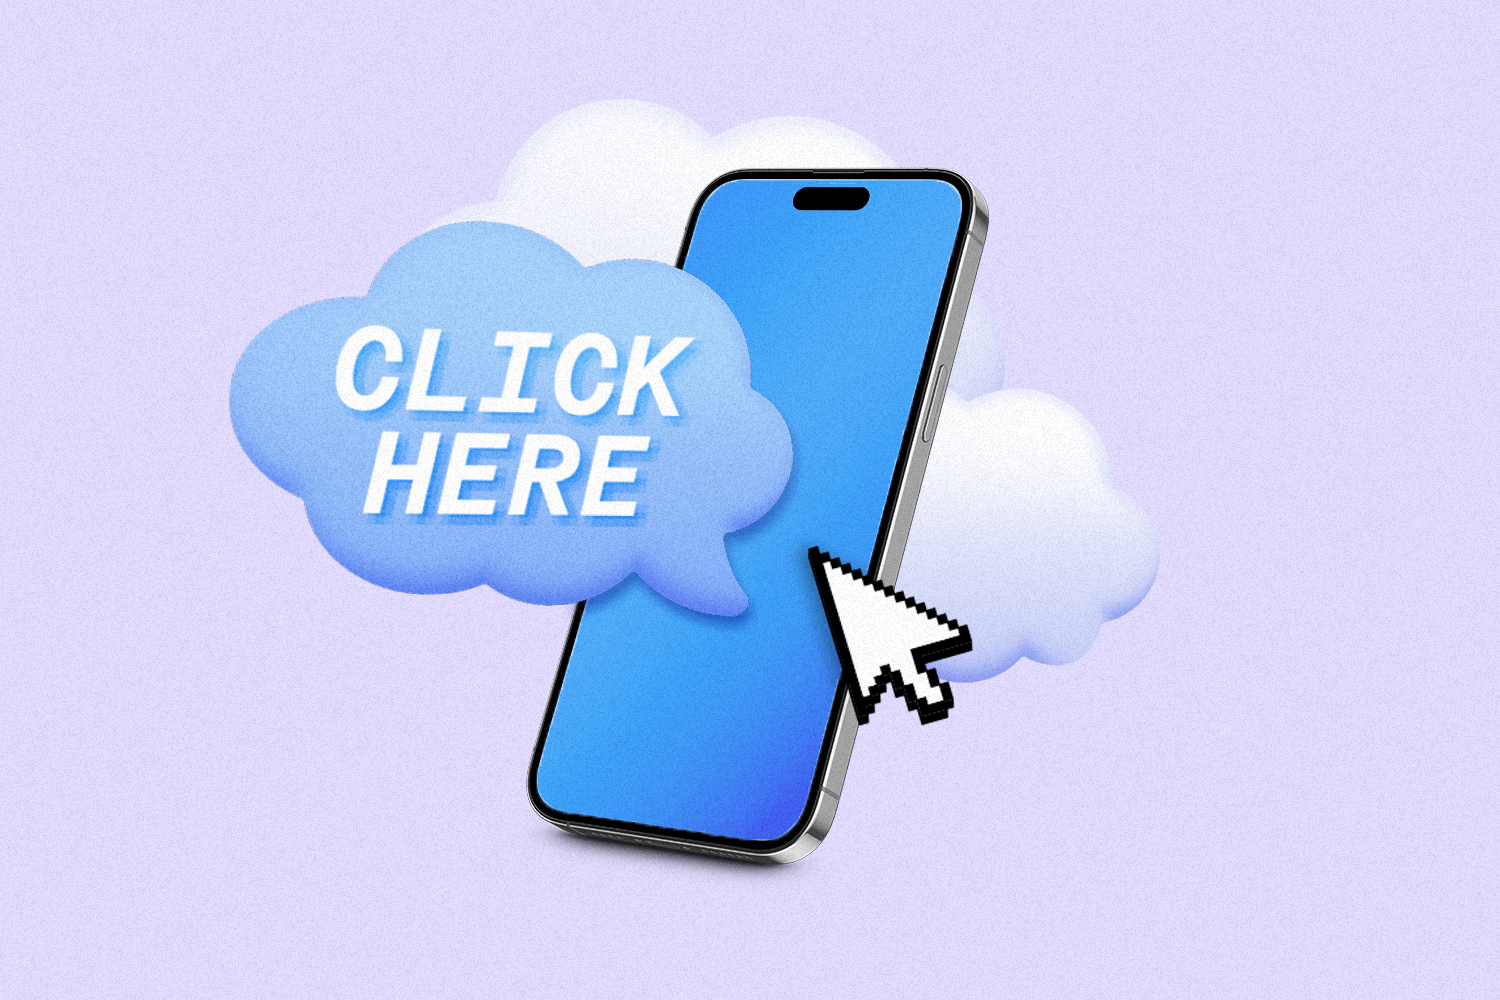 A smartphone with a word cloud coming out of the screen with "Click Here" text on it and a computer mouse pointing to the phone